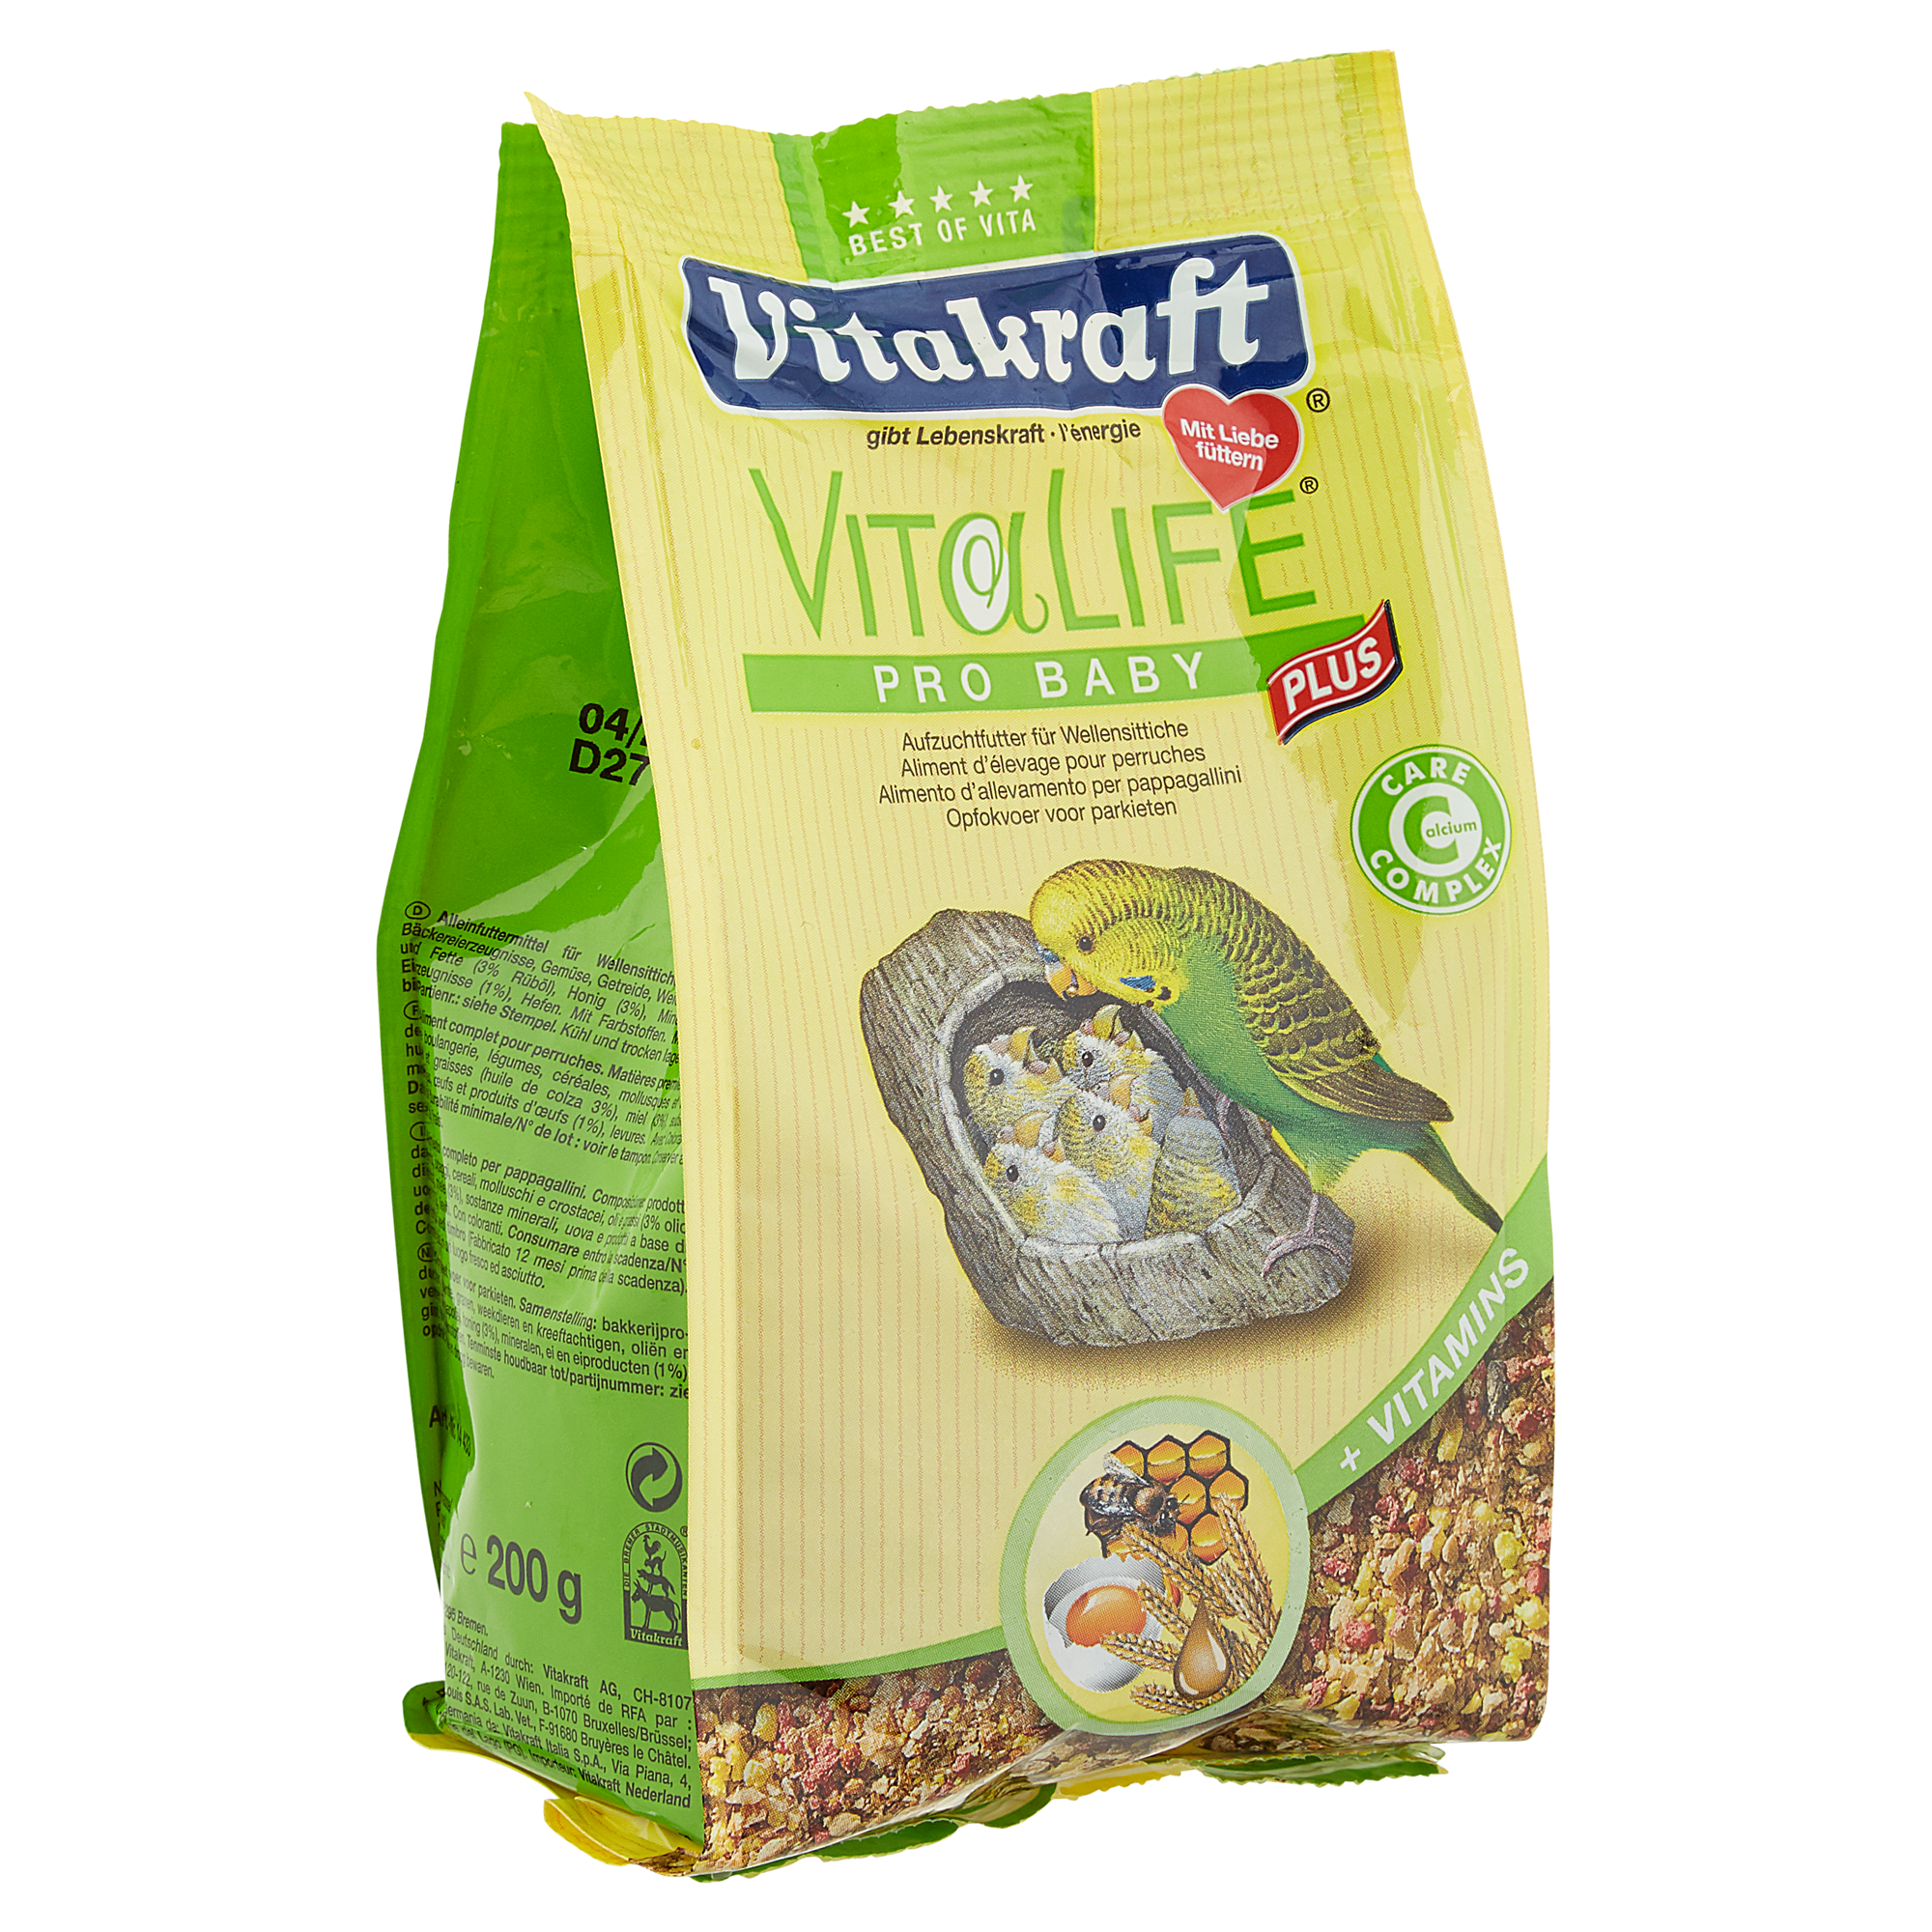 Wellensittich-Futter "Vitalife" Pro Baby Plus 200 g + product picture